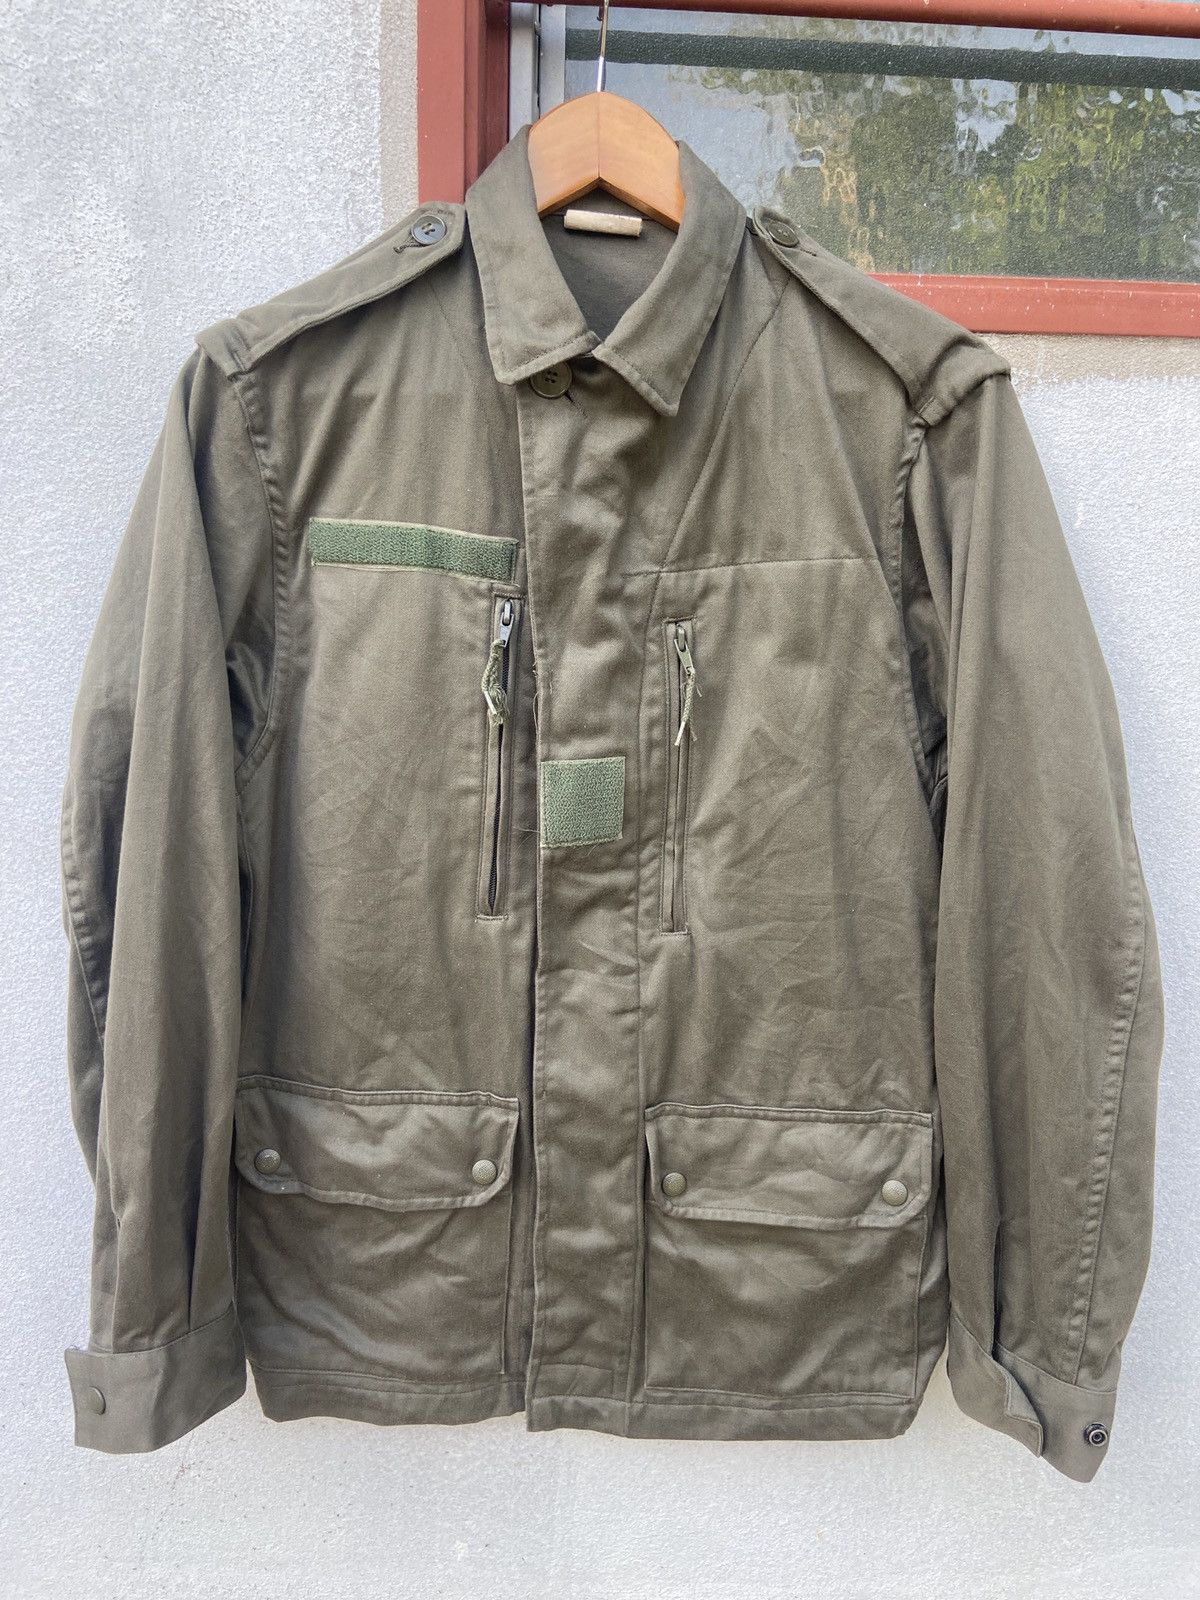 Vintage Vintage Socovet Bais 1988 French Military Army Jacket | Grailed